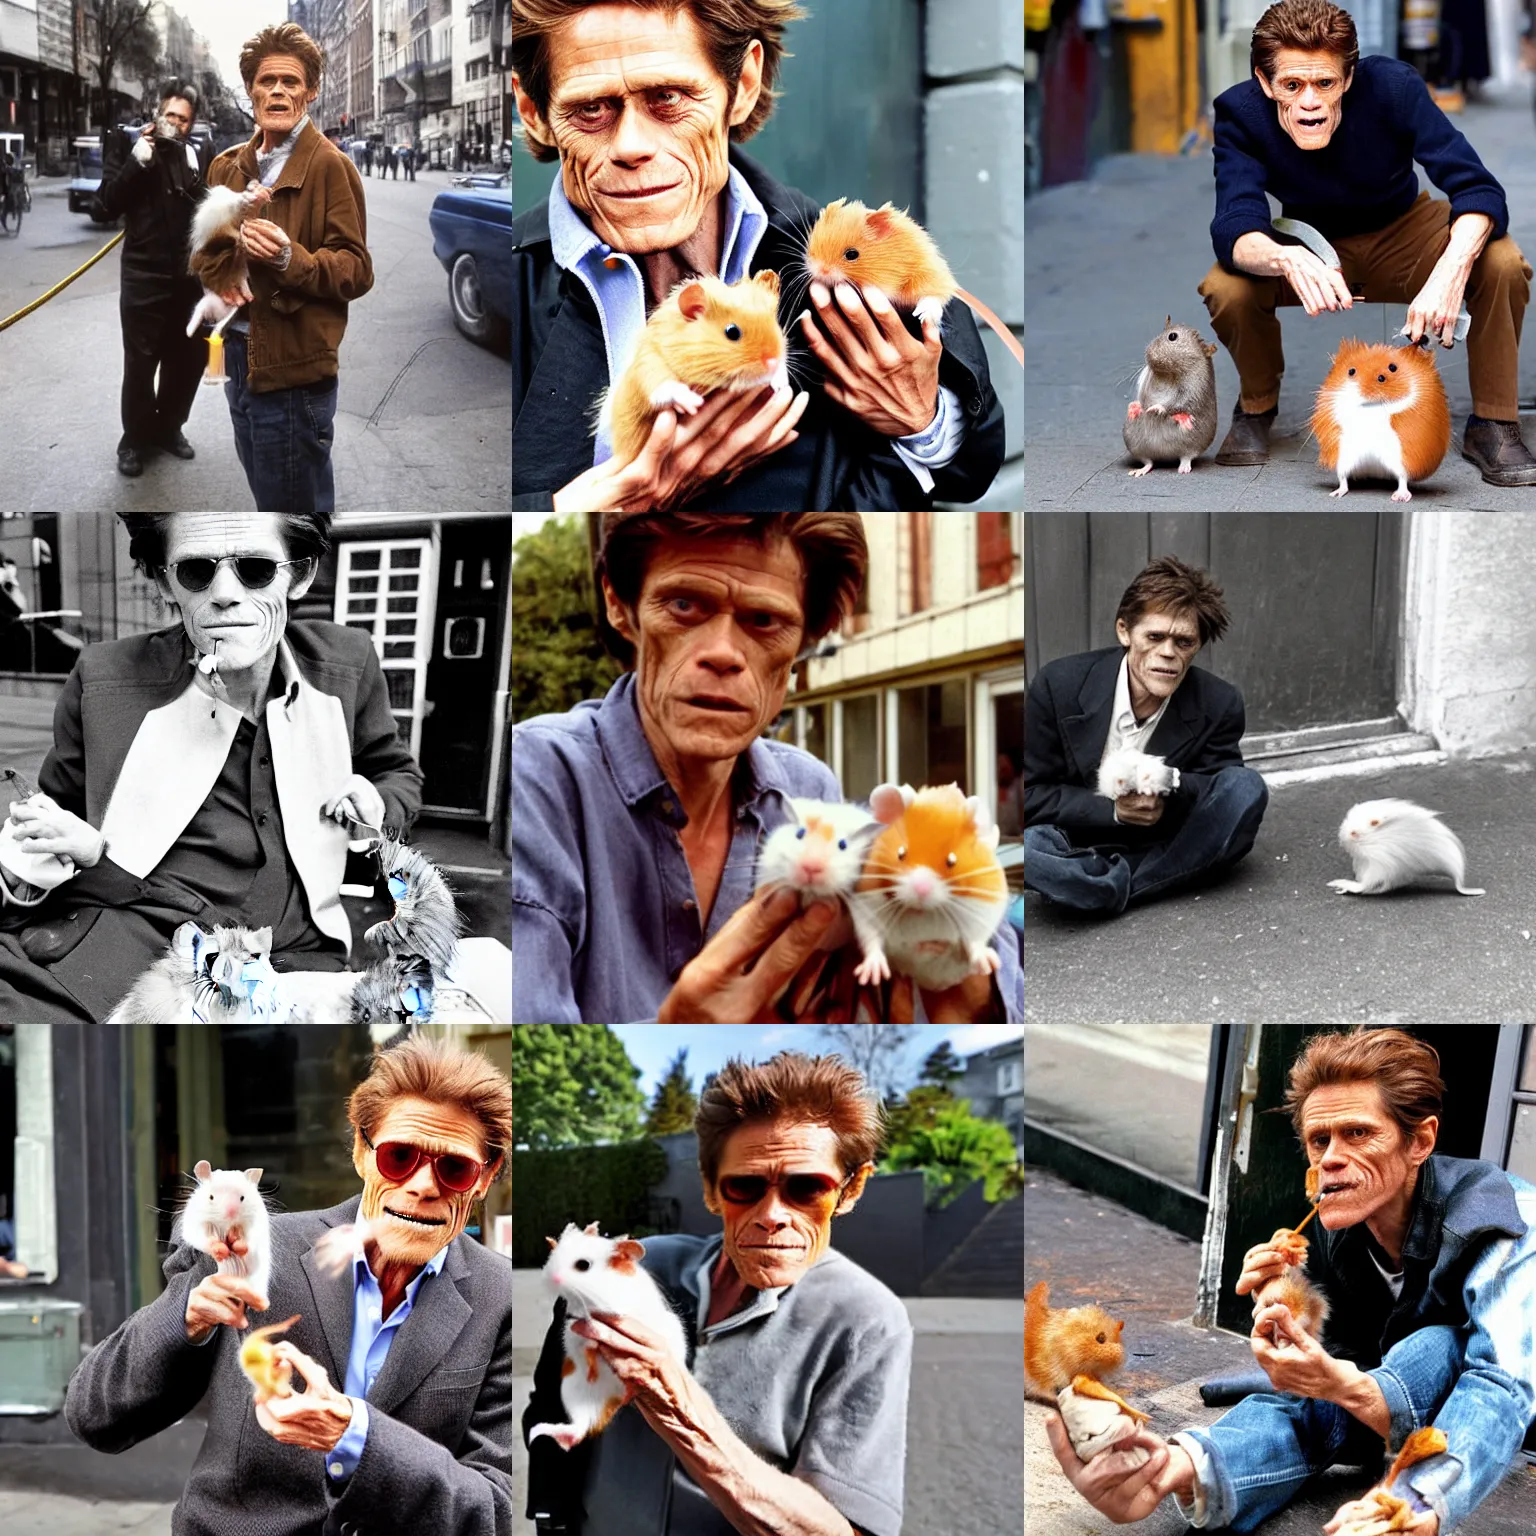 Prompt: Willem Dafoe with a cigarette and holding two hamsters on the street next to a van